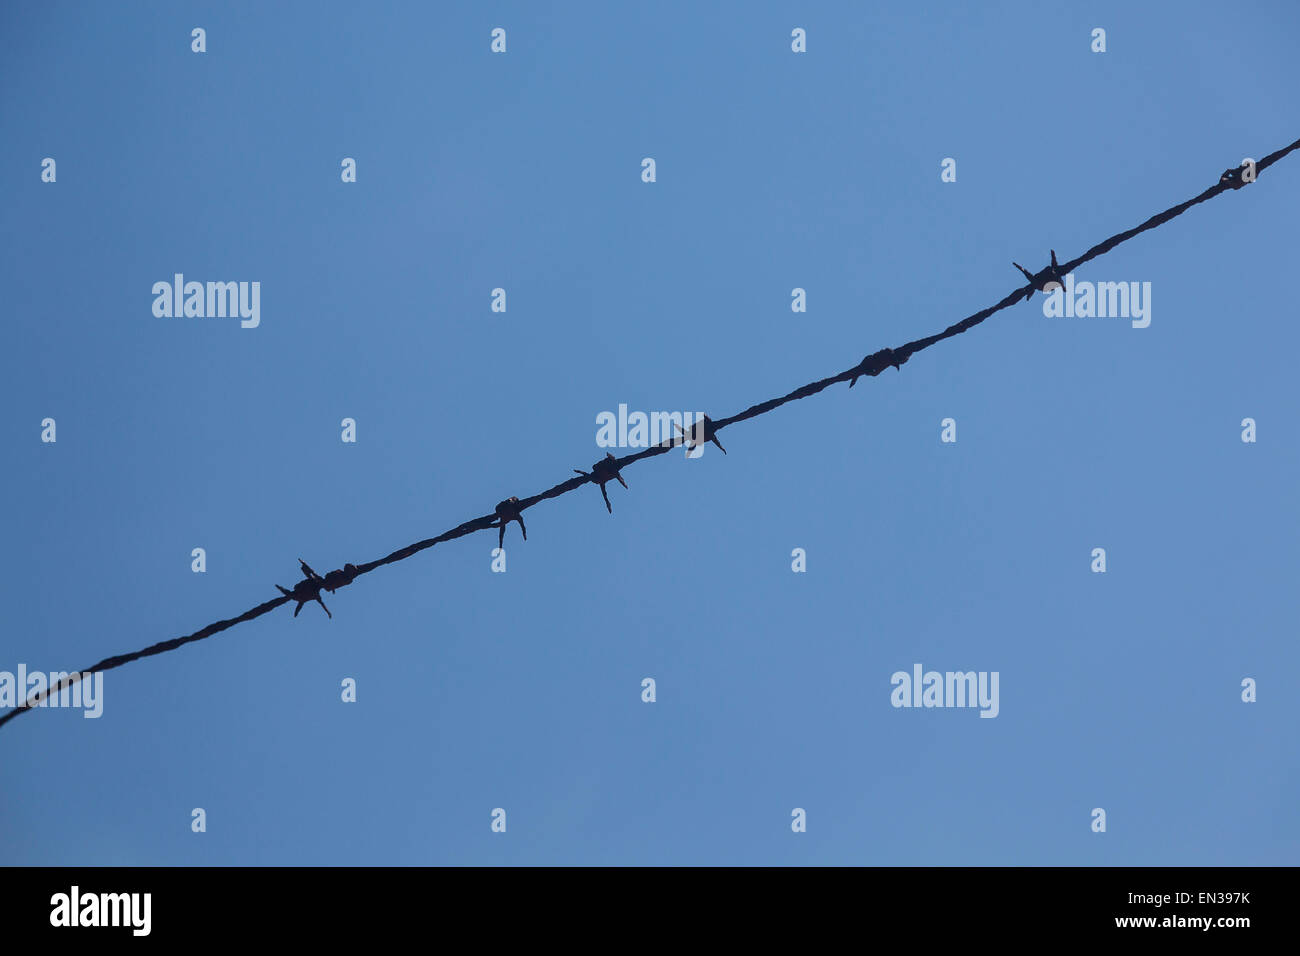 Barbed wire against blue sky, Germany Stock Photo